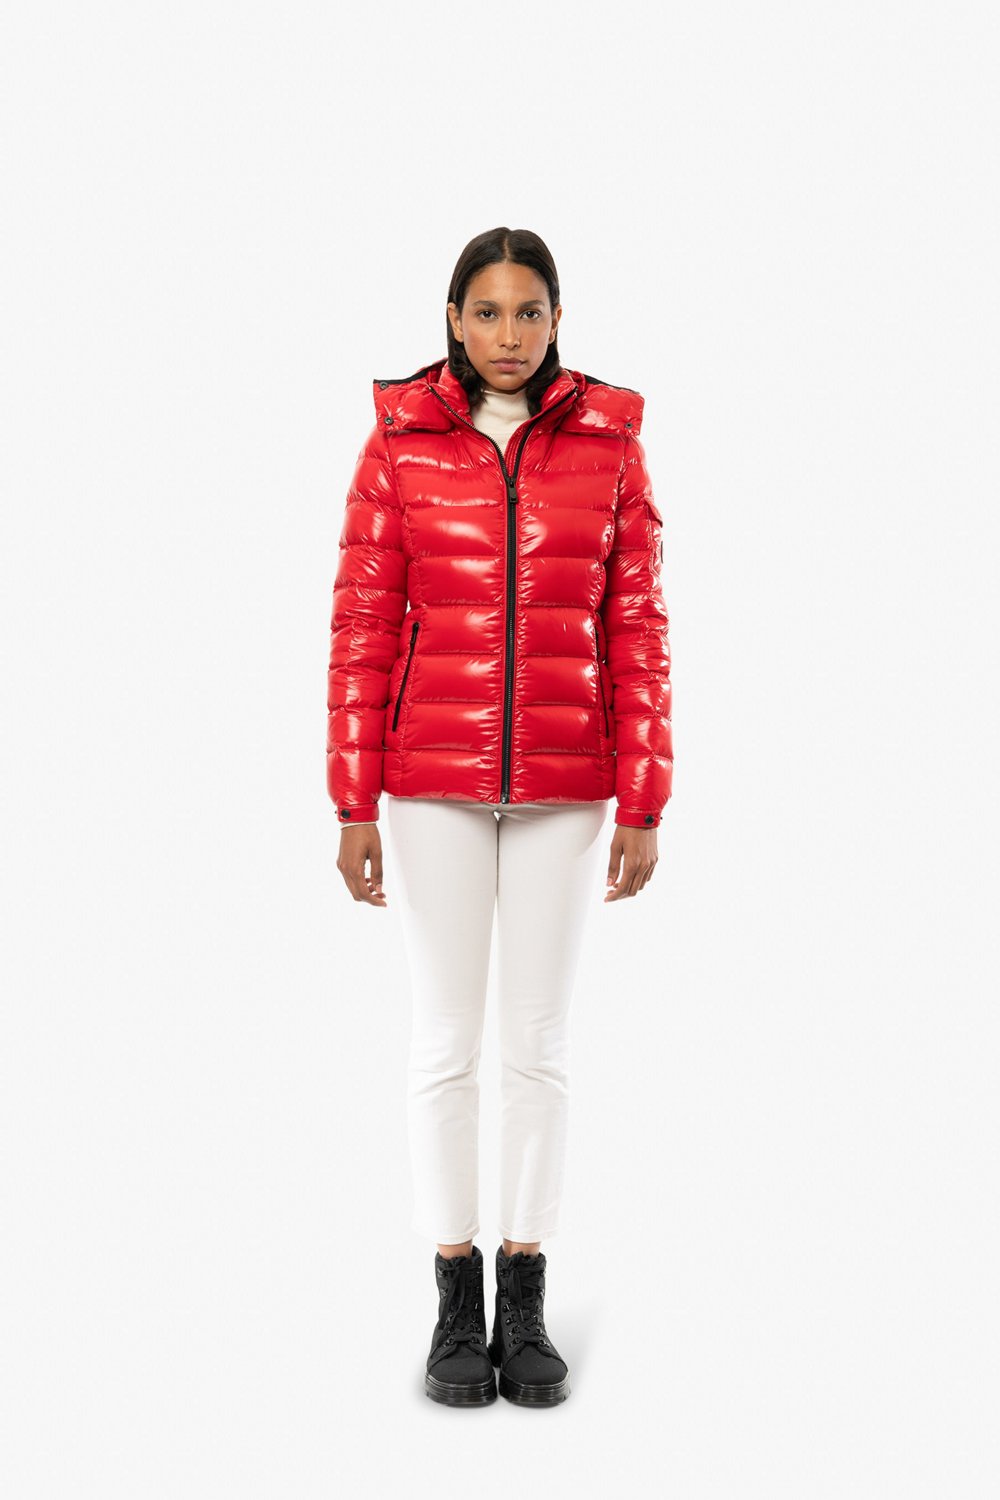 The Recycled Planet Womens Igloo Jacket